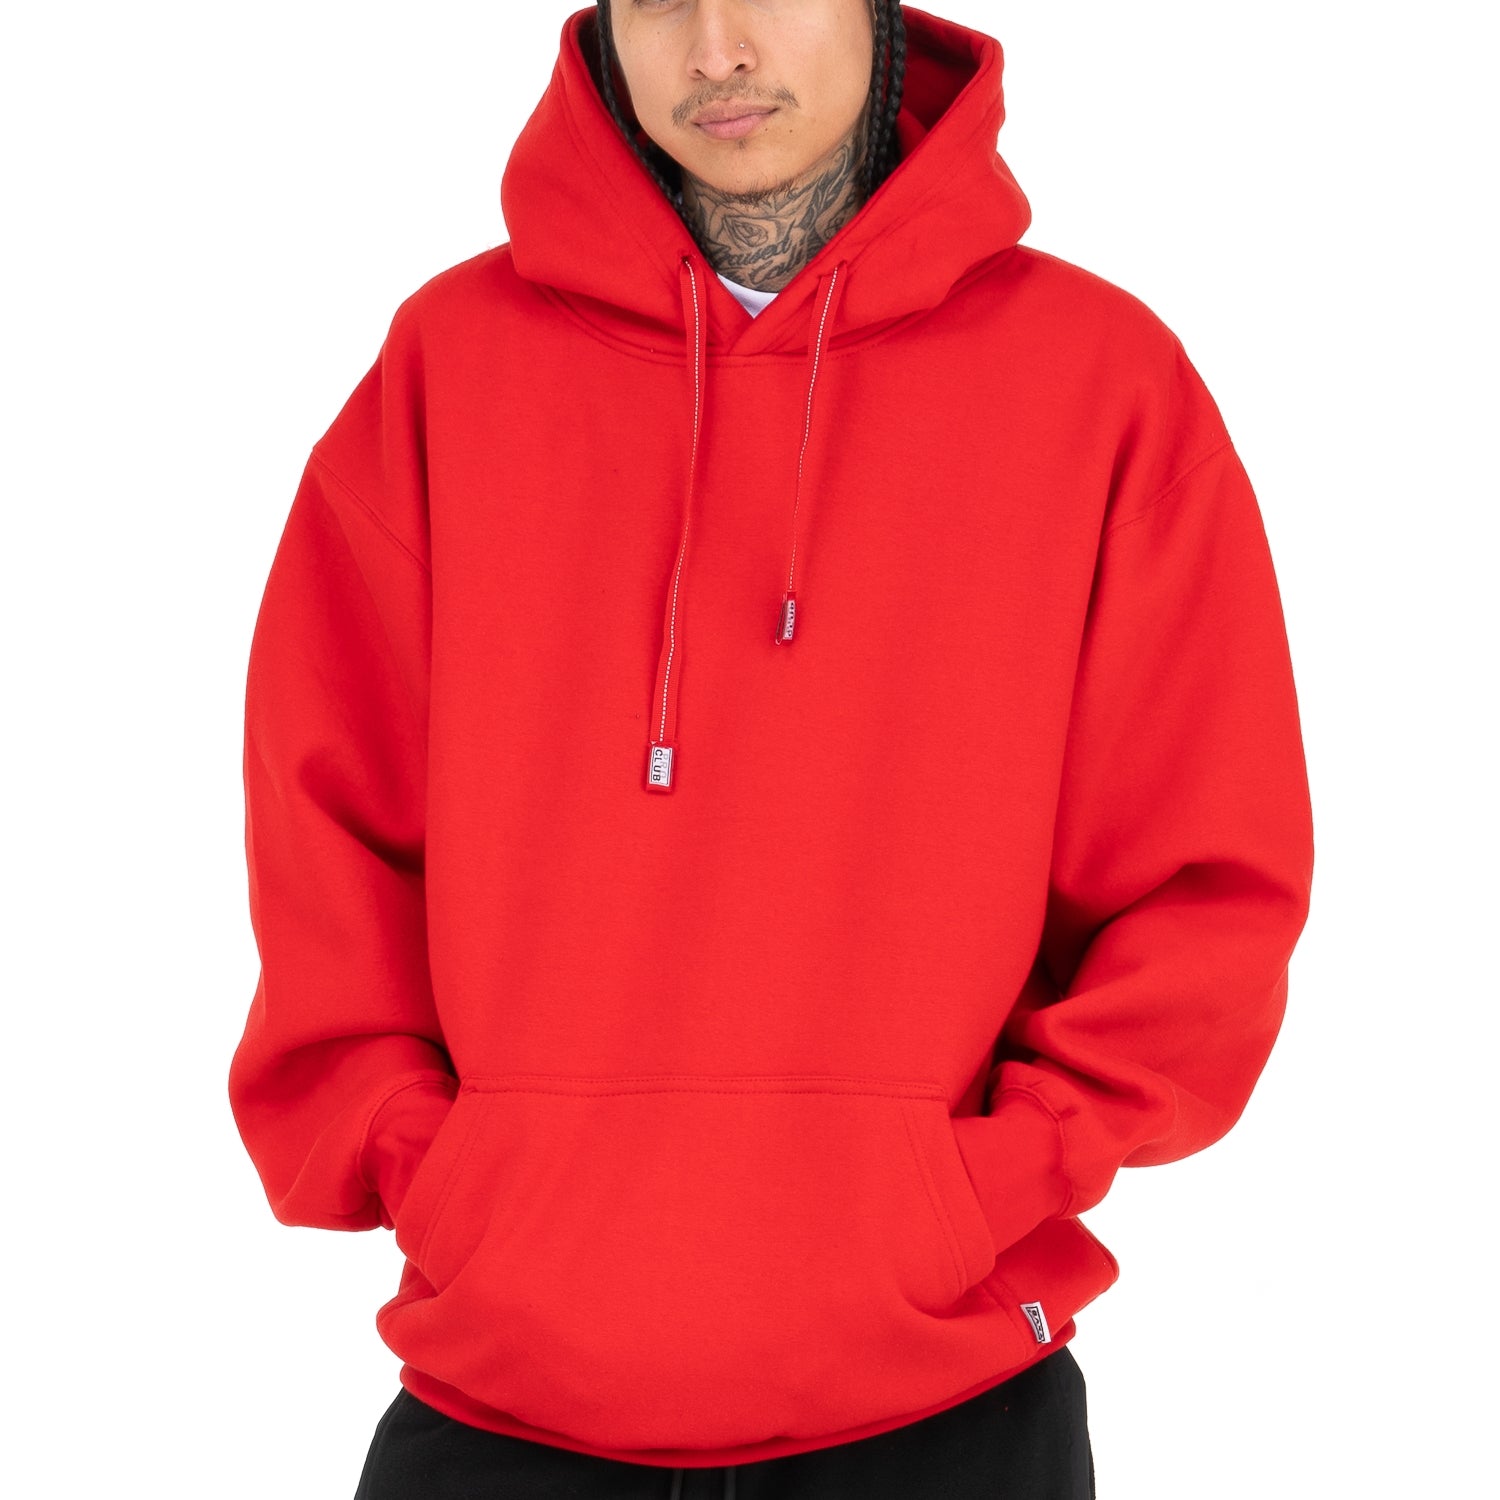 Pro Club Men's Heavyweight Pullover Hoodie (13oz) Red